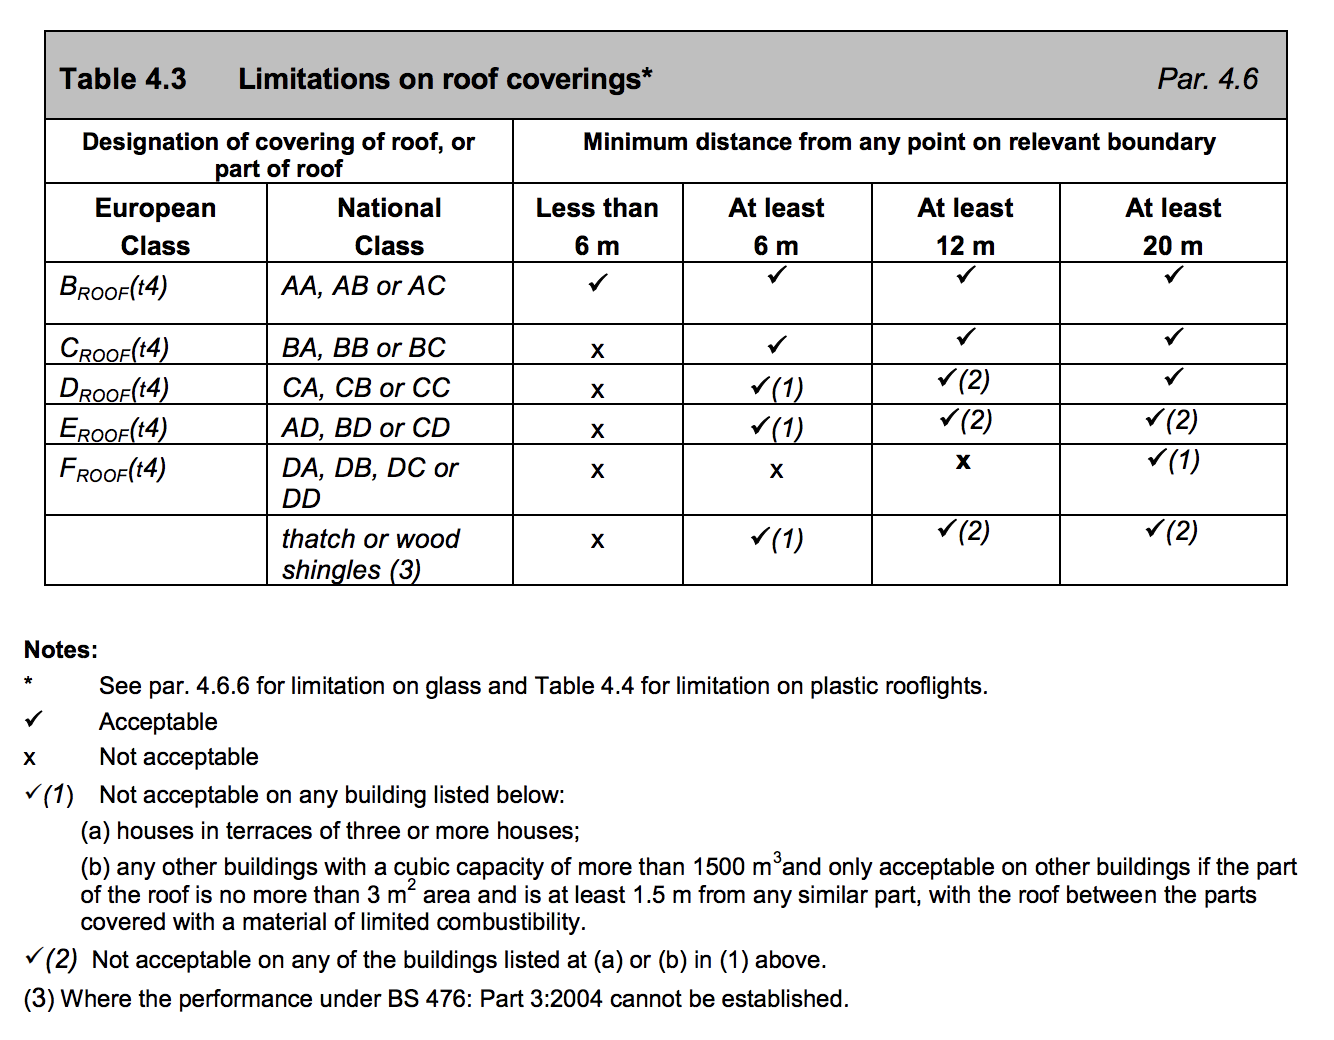 Table HB6 - Limitations on roof coverings - Extract from TGD B Vol. 2